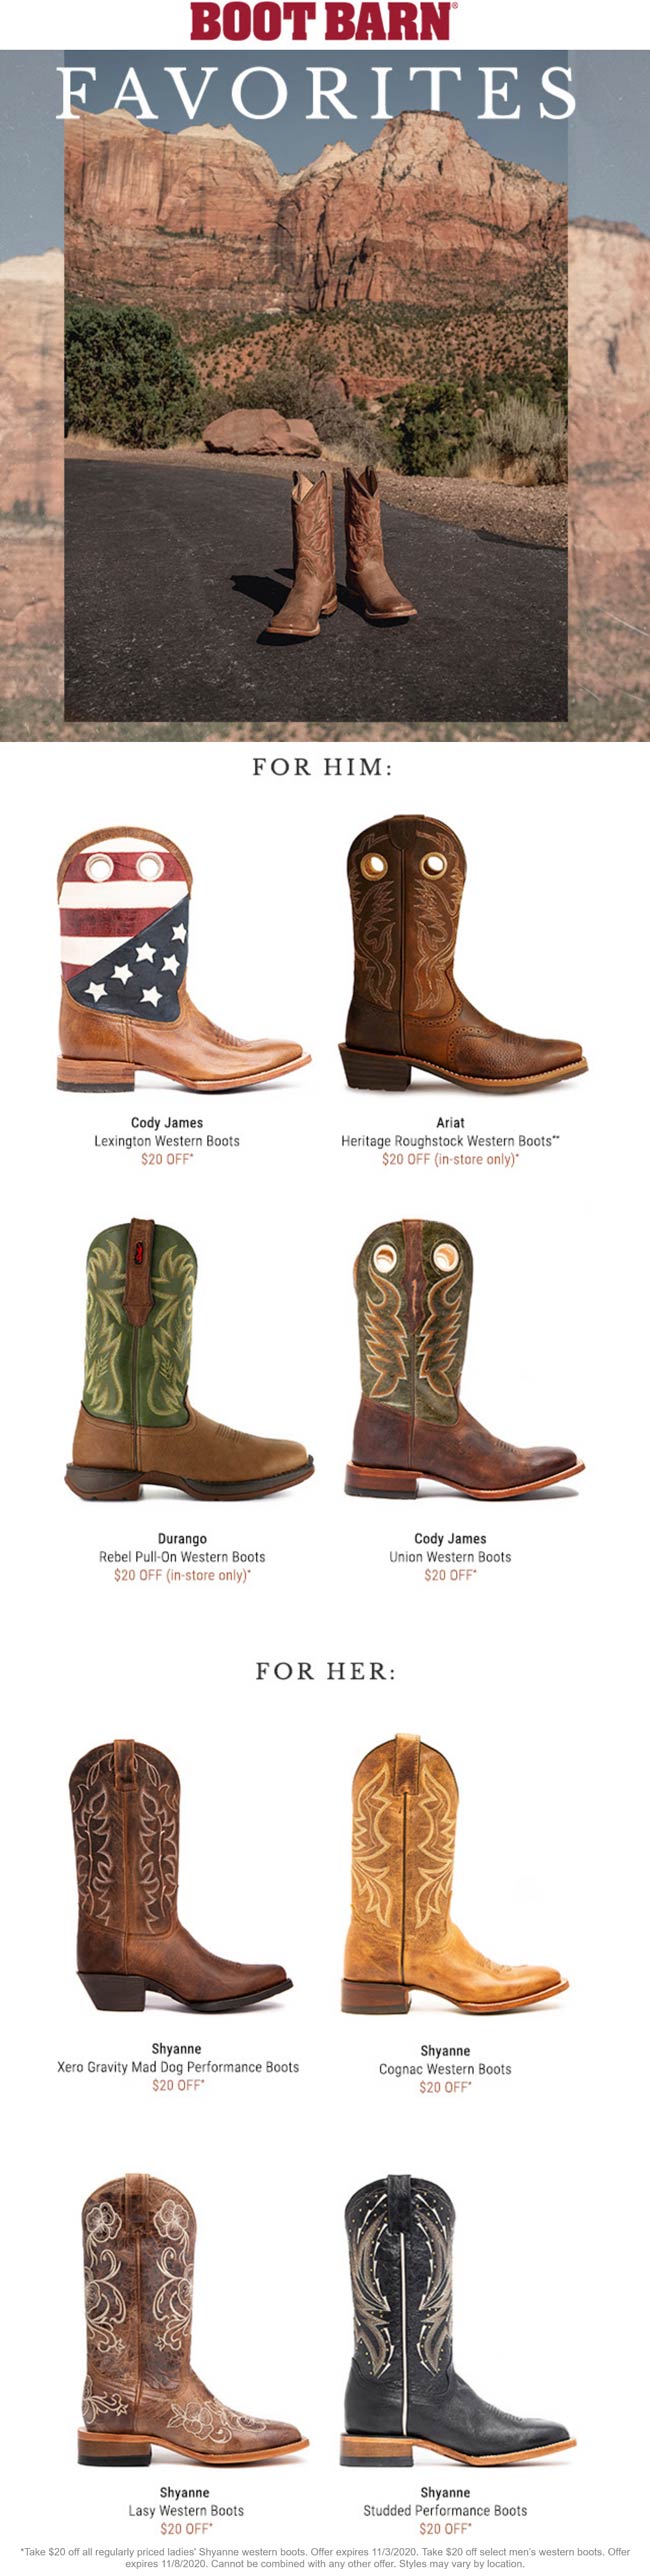 Boot Barn stores Coupon  $20 off favorite boots at Boot Barn #bootbarn 